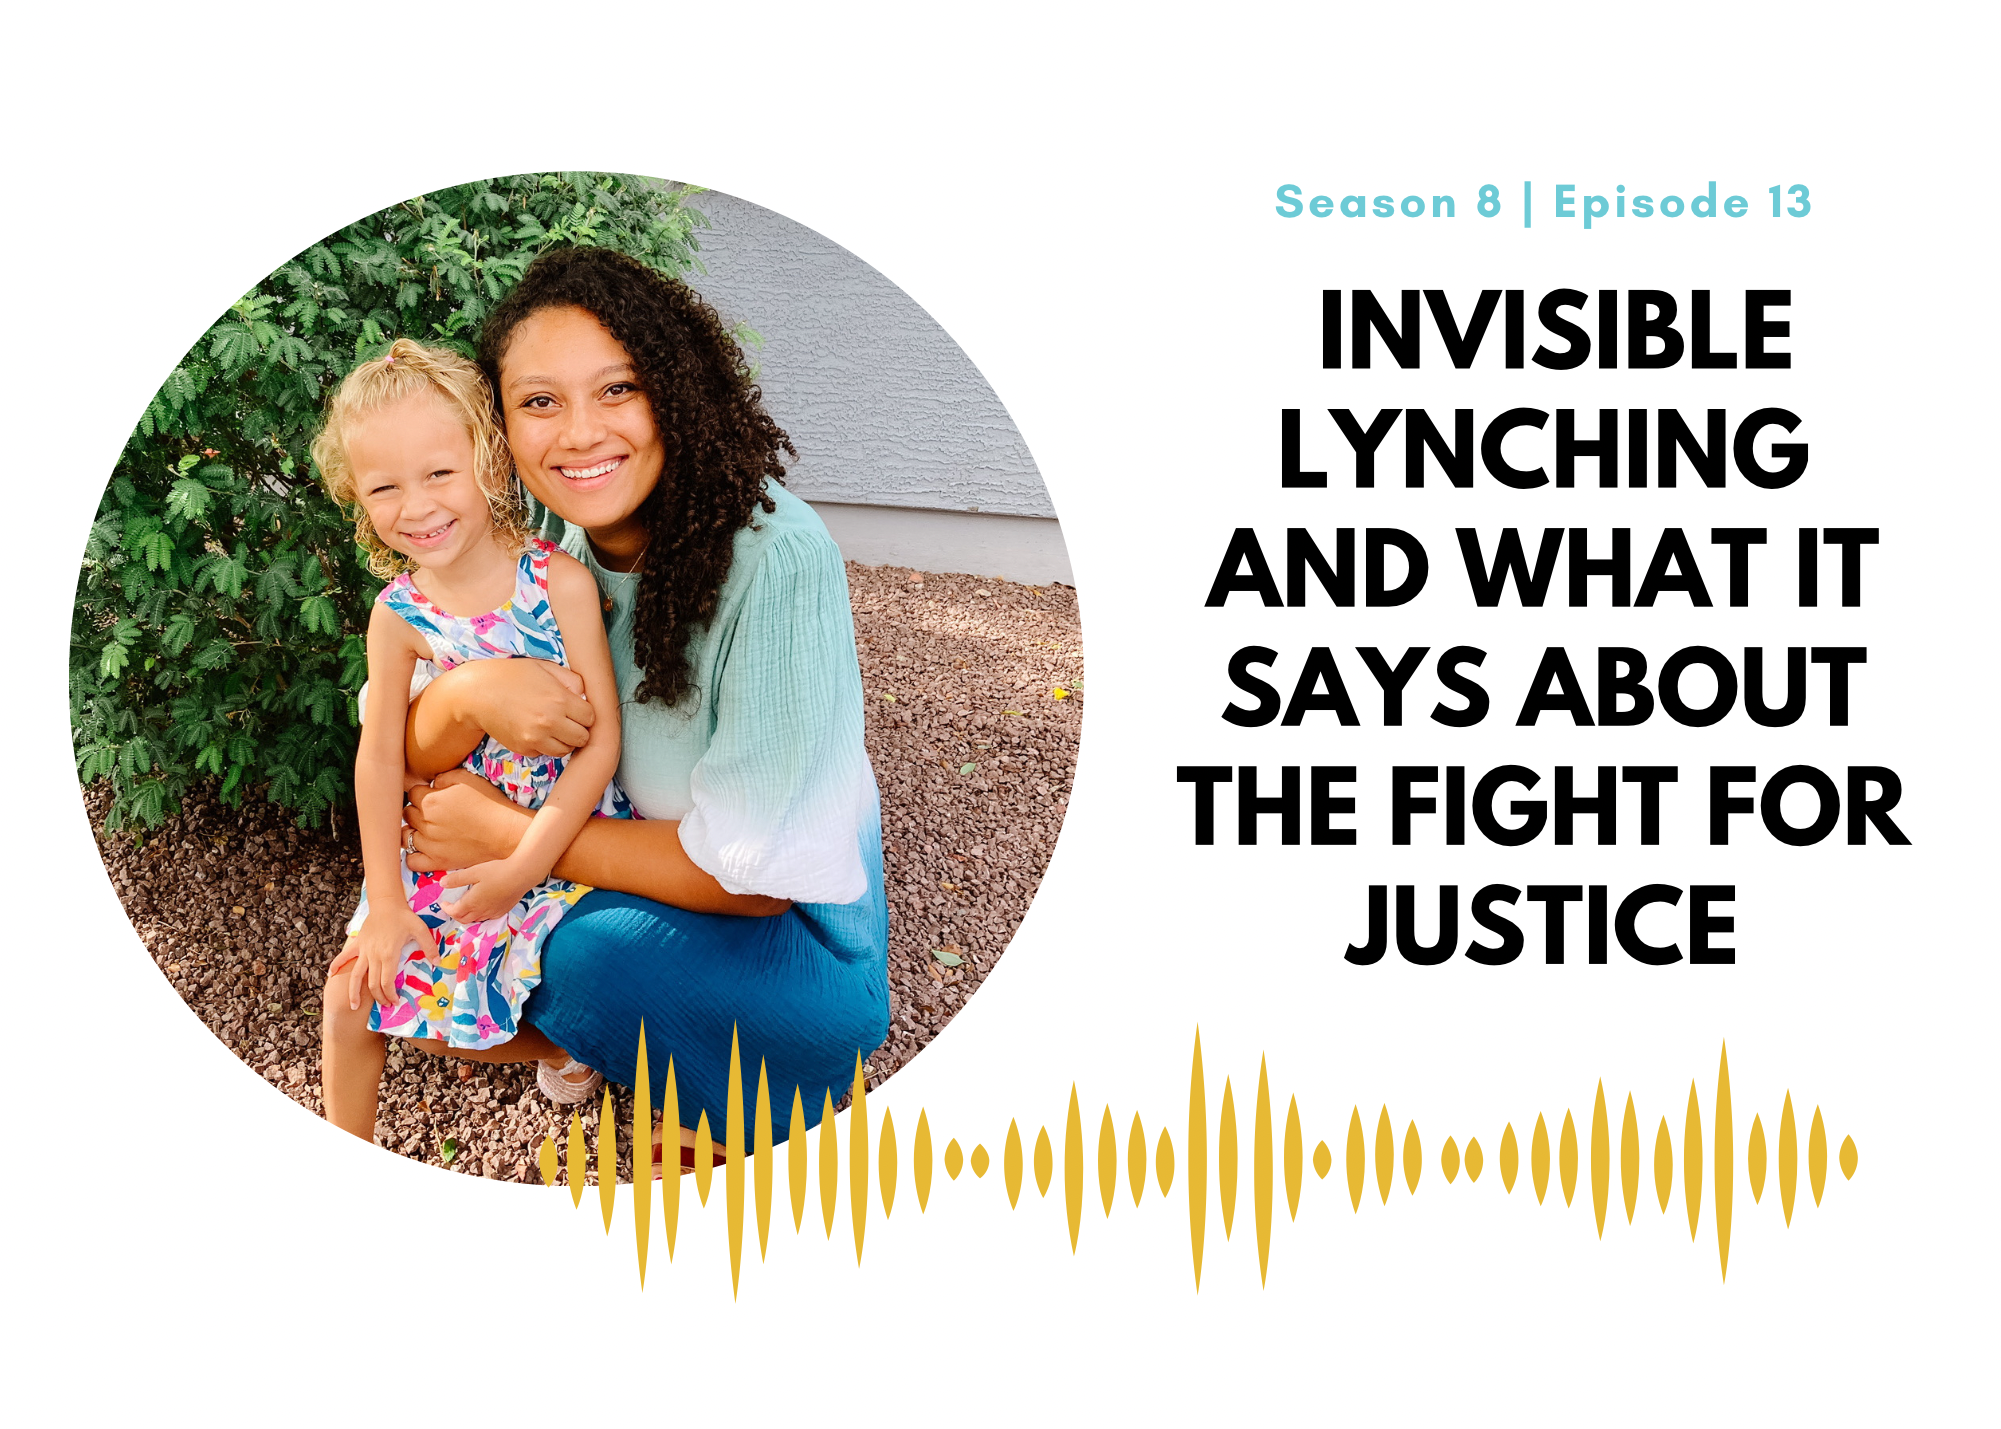 Invisible Lynching and What It Says About the Fight for Justice